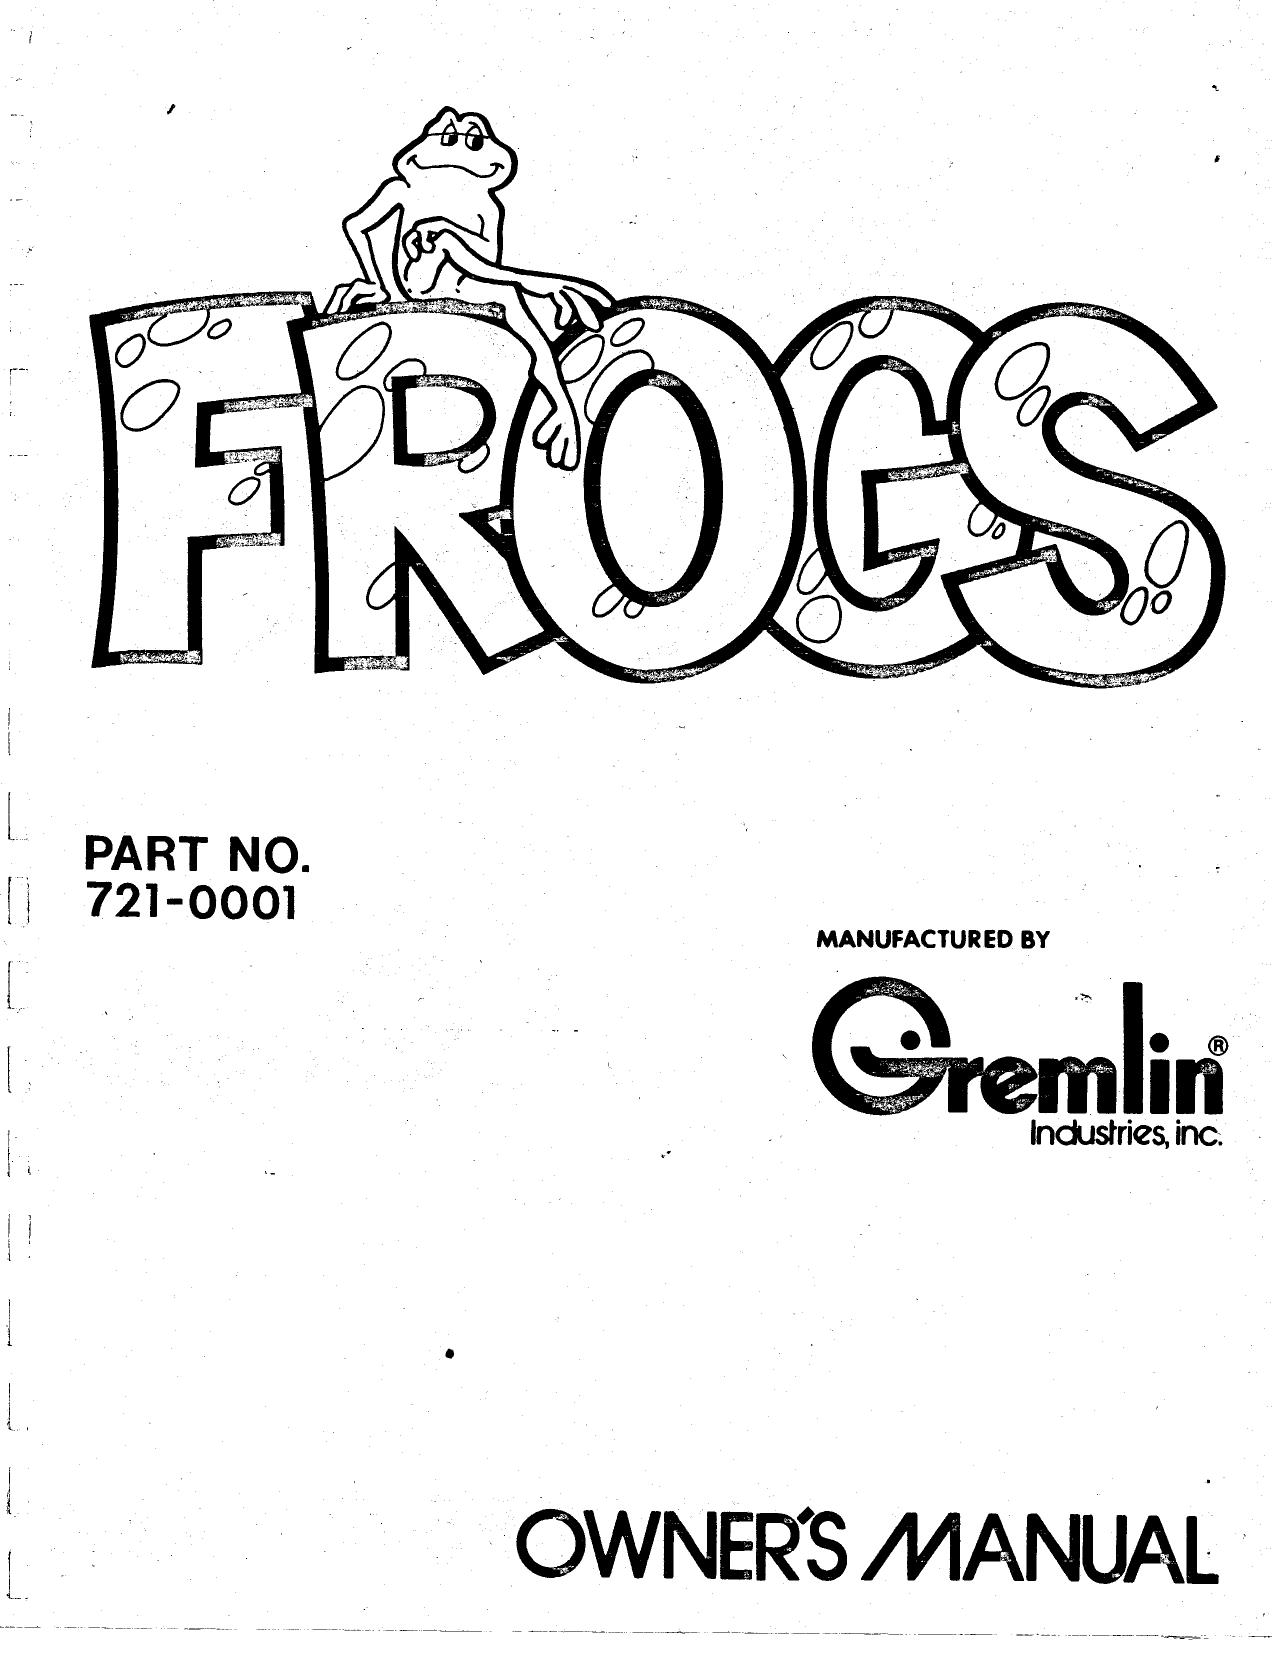 Frogs Manual